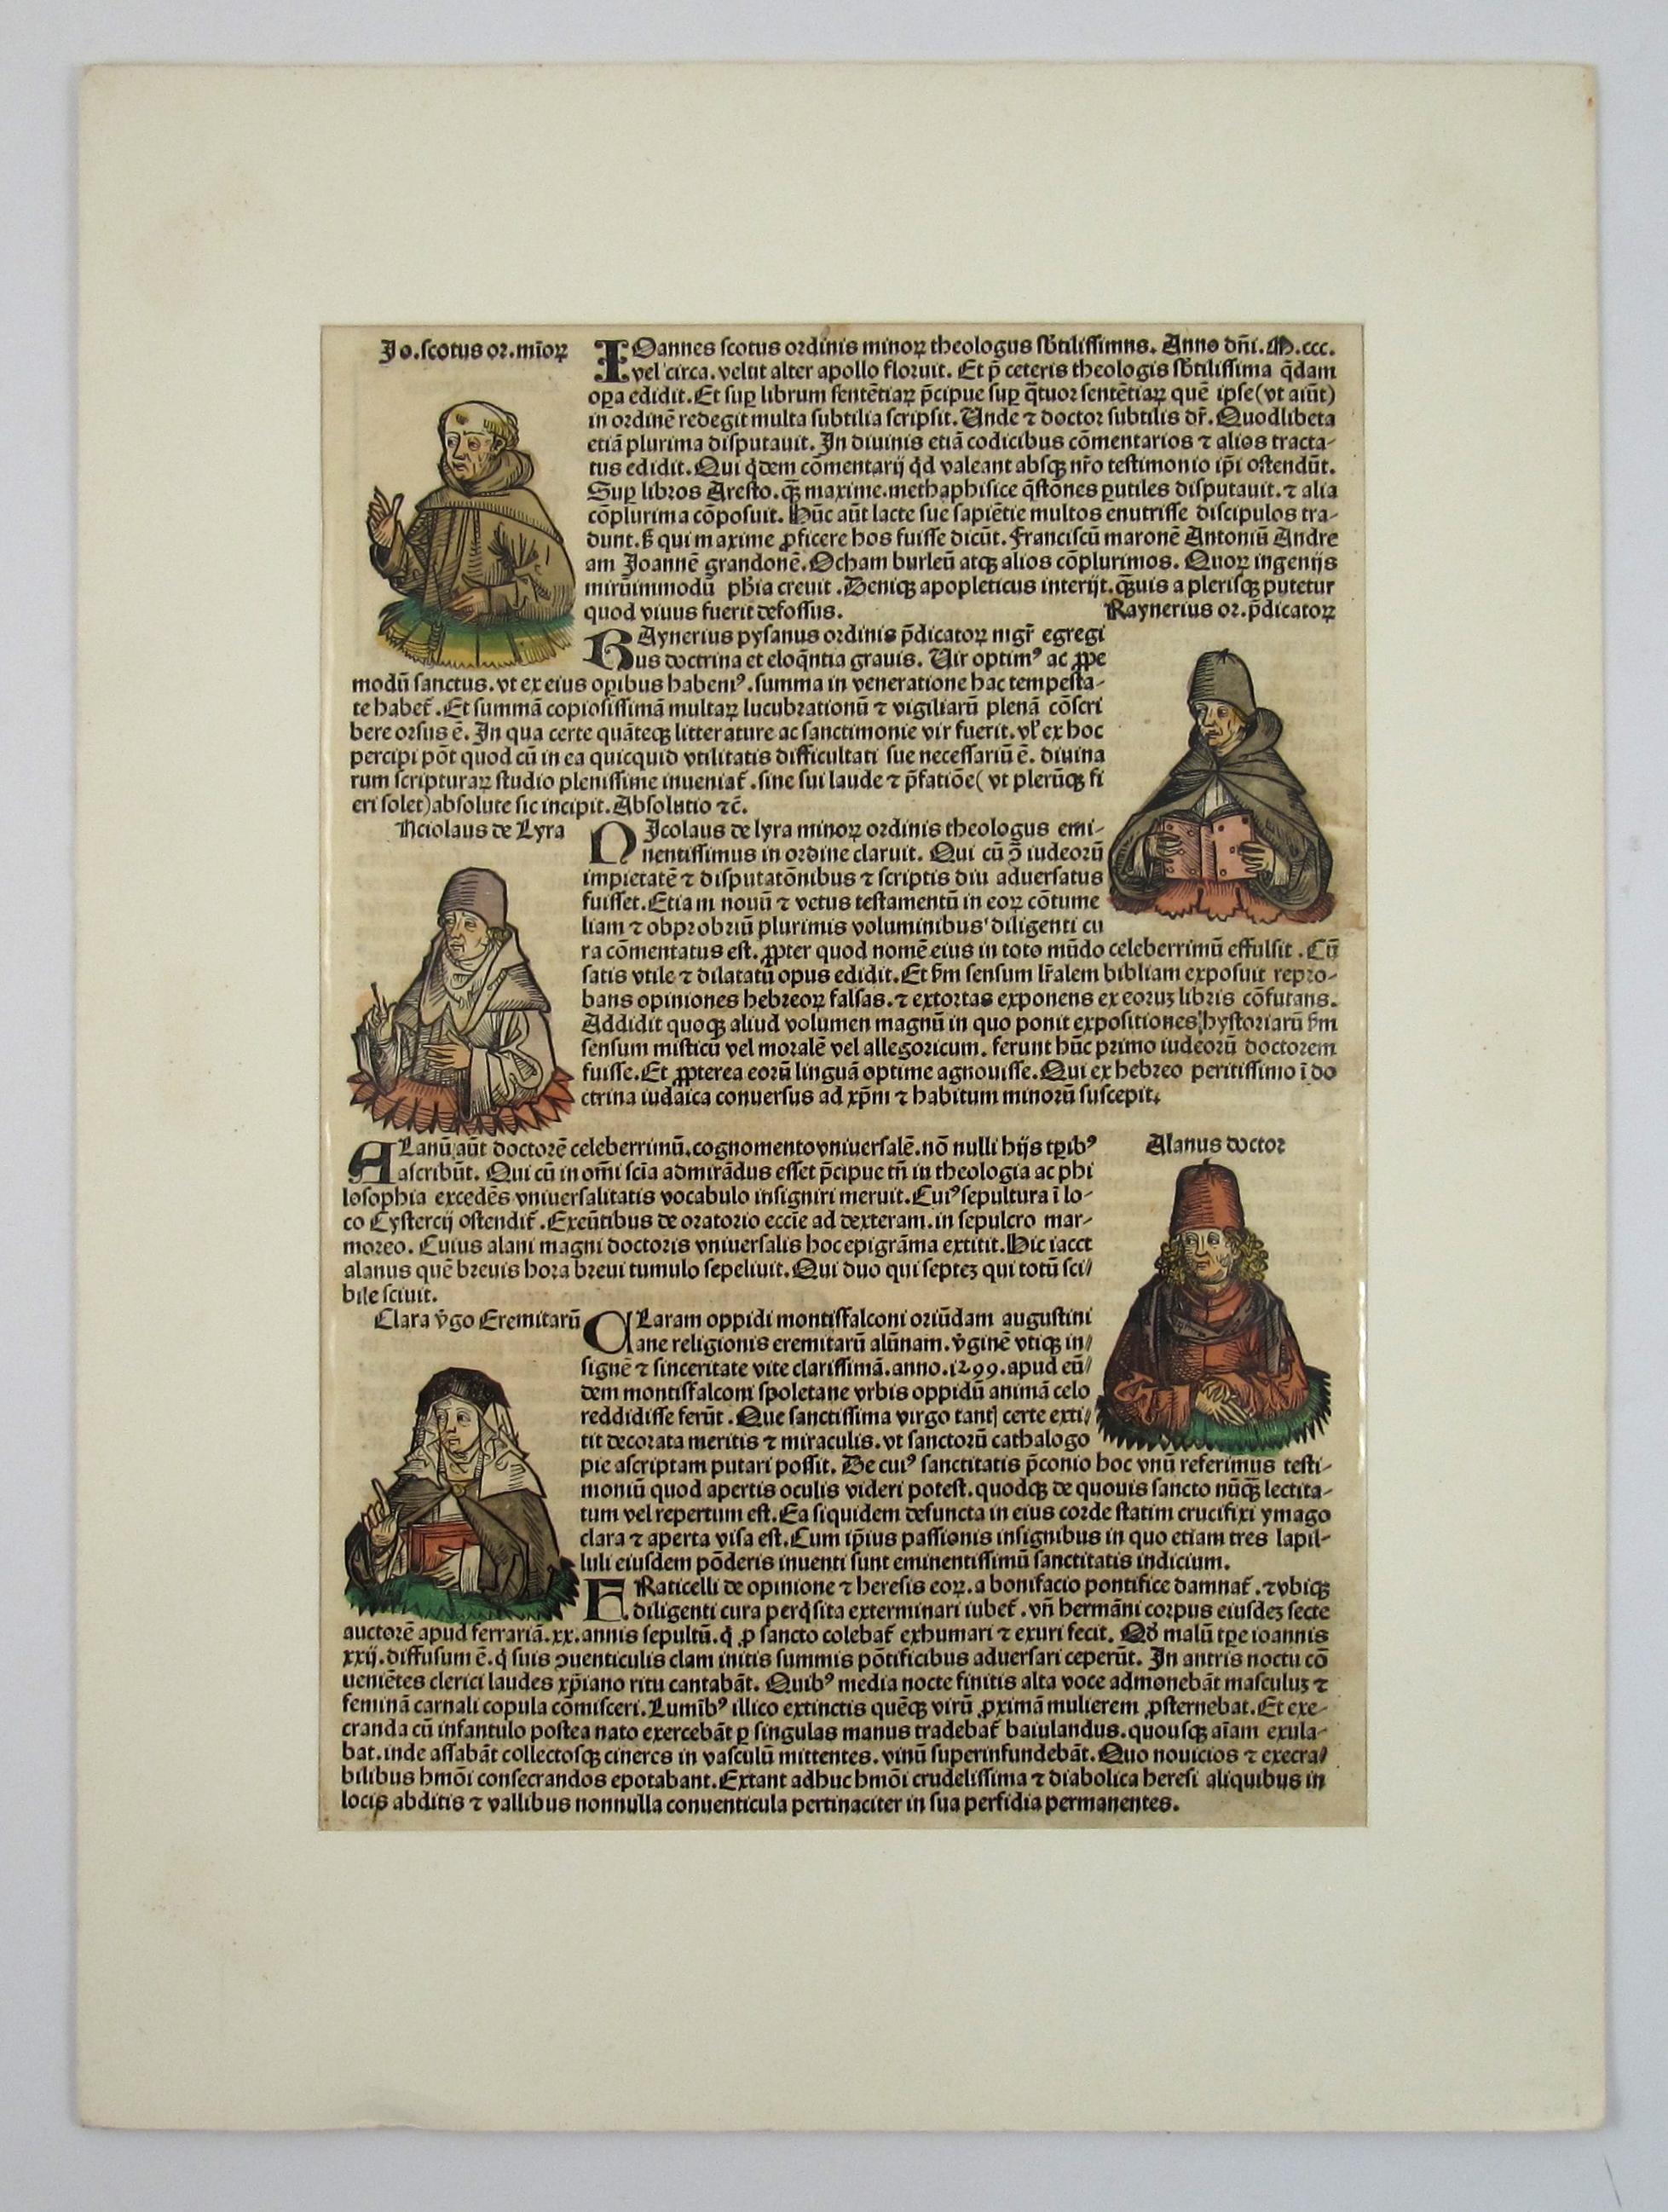 Hartmann Schedel
(German, * February 13, 1440, Nuremberg; † November 28, 1514)

I am offering here for sale a rather good collection of ten (10) antique woodcuts taken from Schedel’s World chronicle, also known as the Nürnberg Chronicle, published